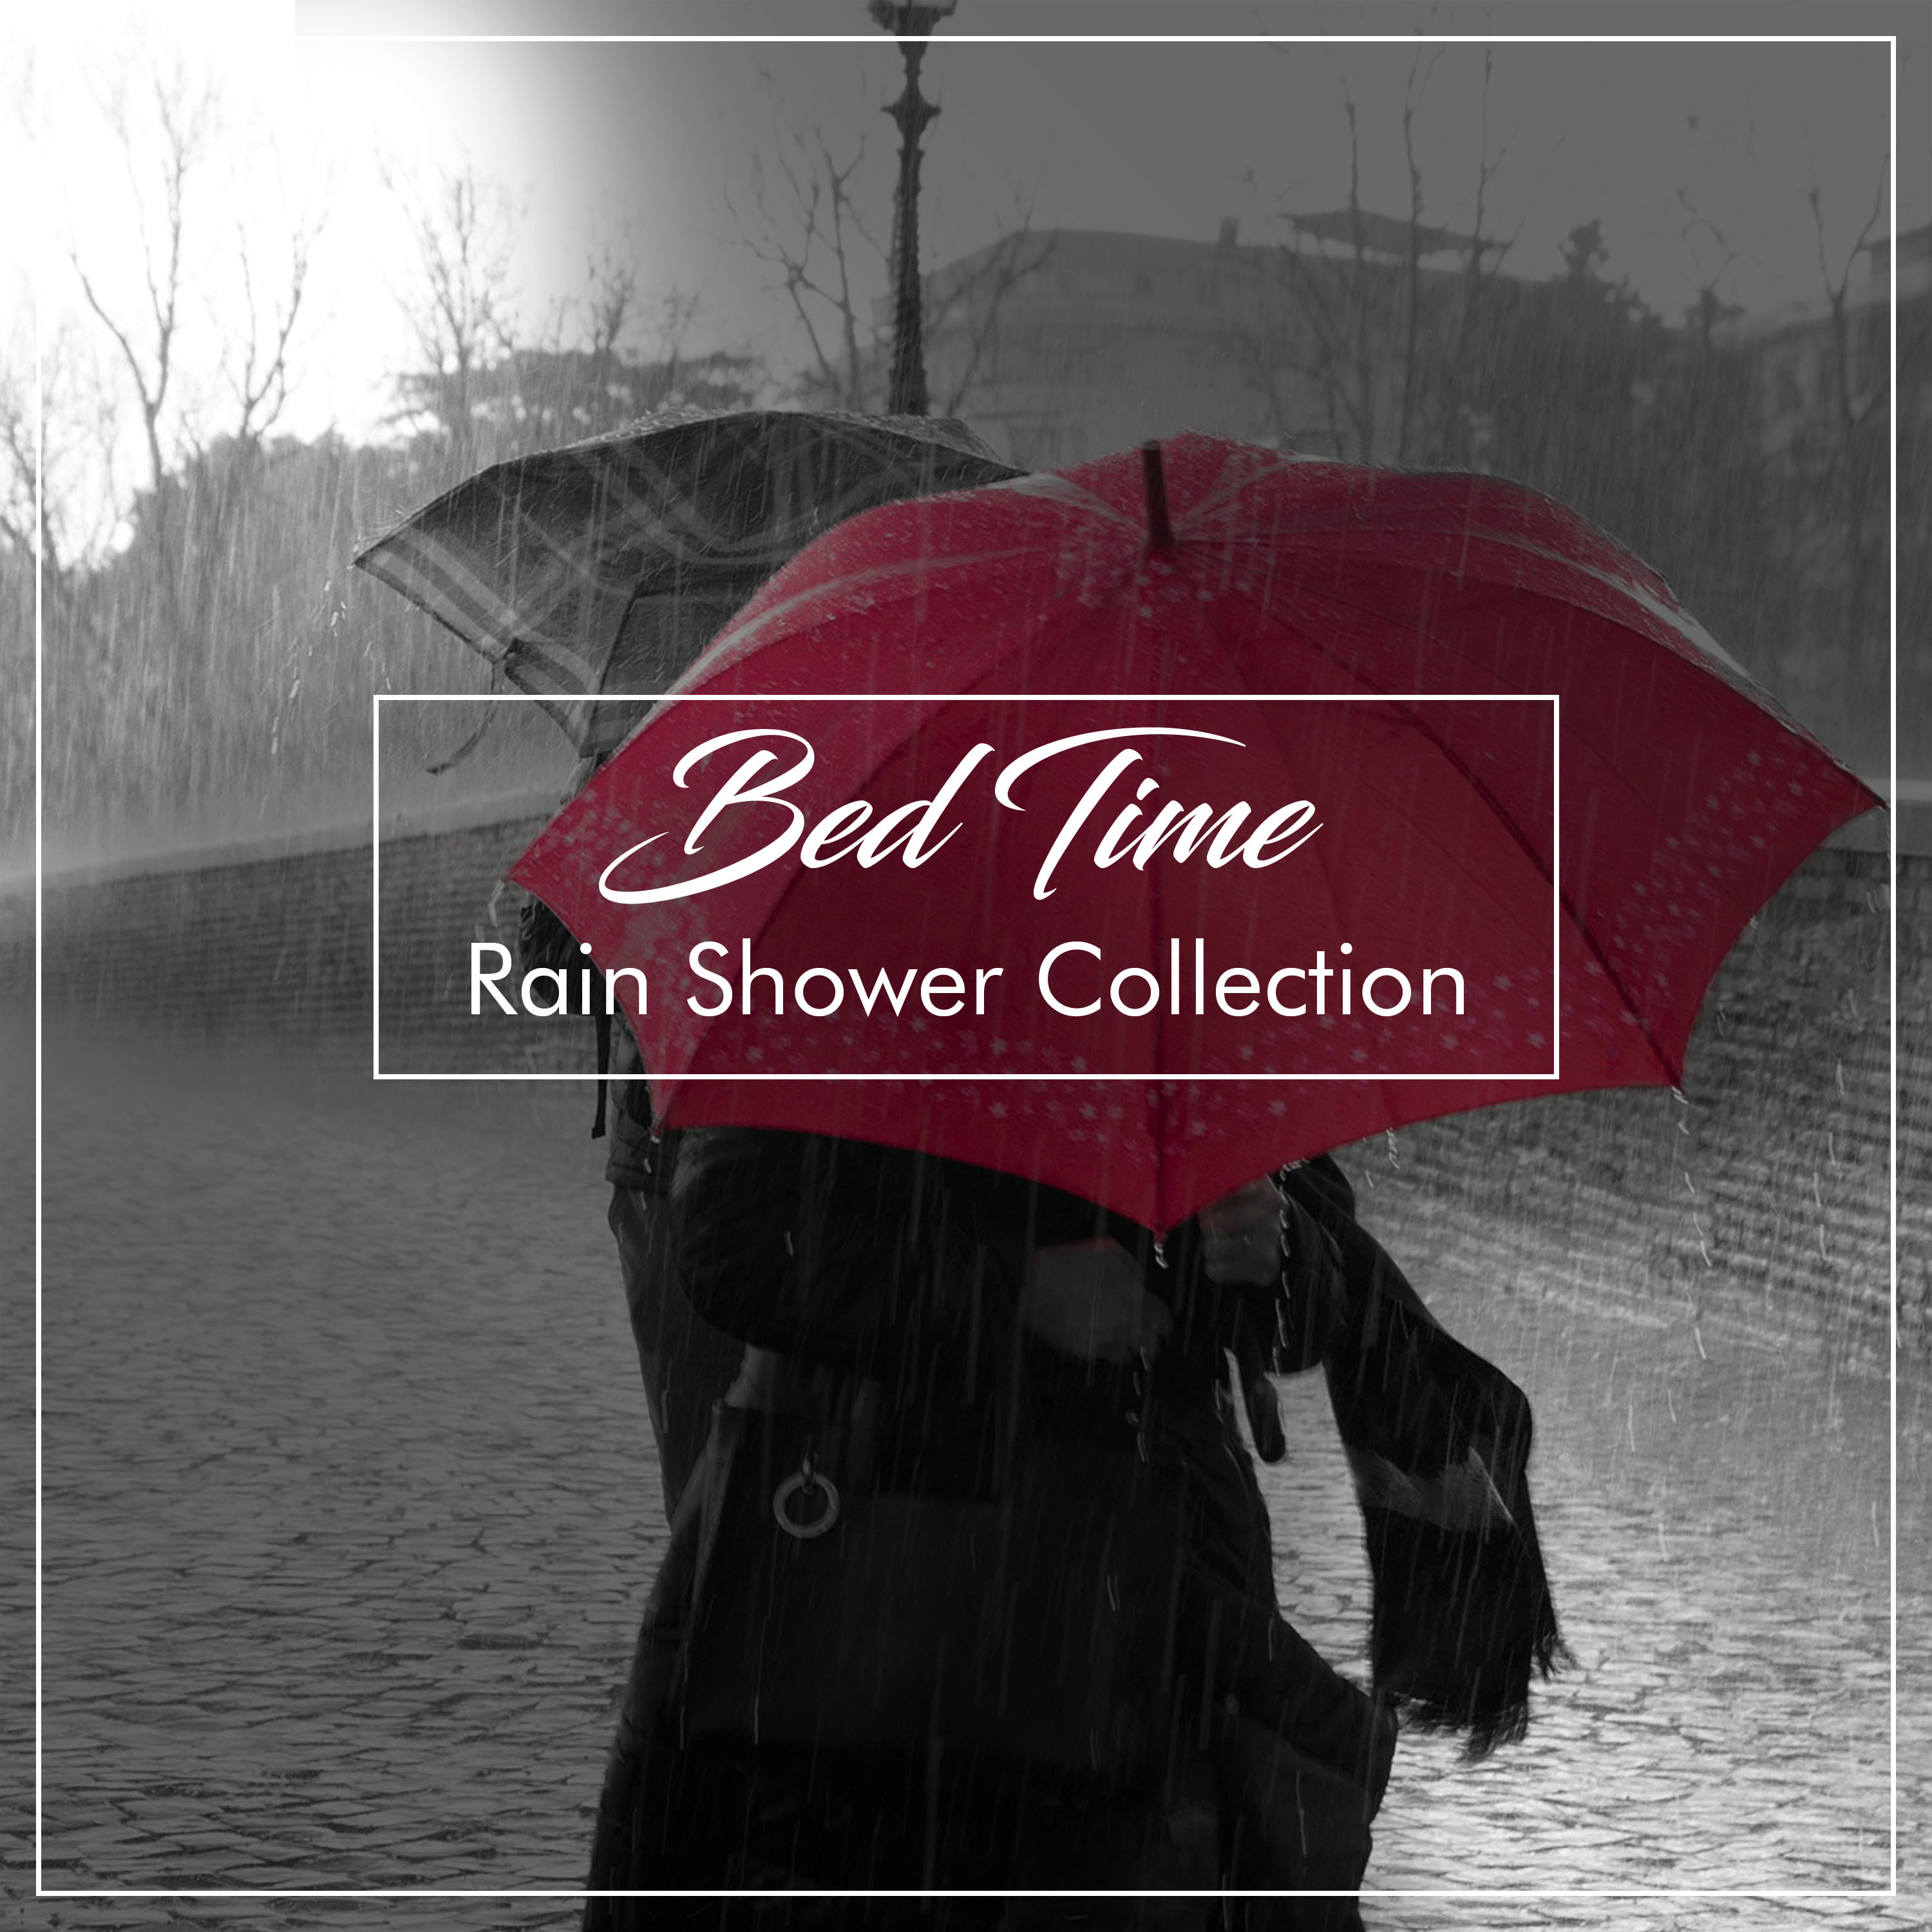 #13 Bed Time Rain Shower Collection for Sleep and Relaxation